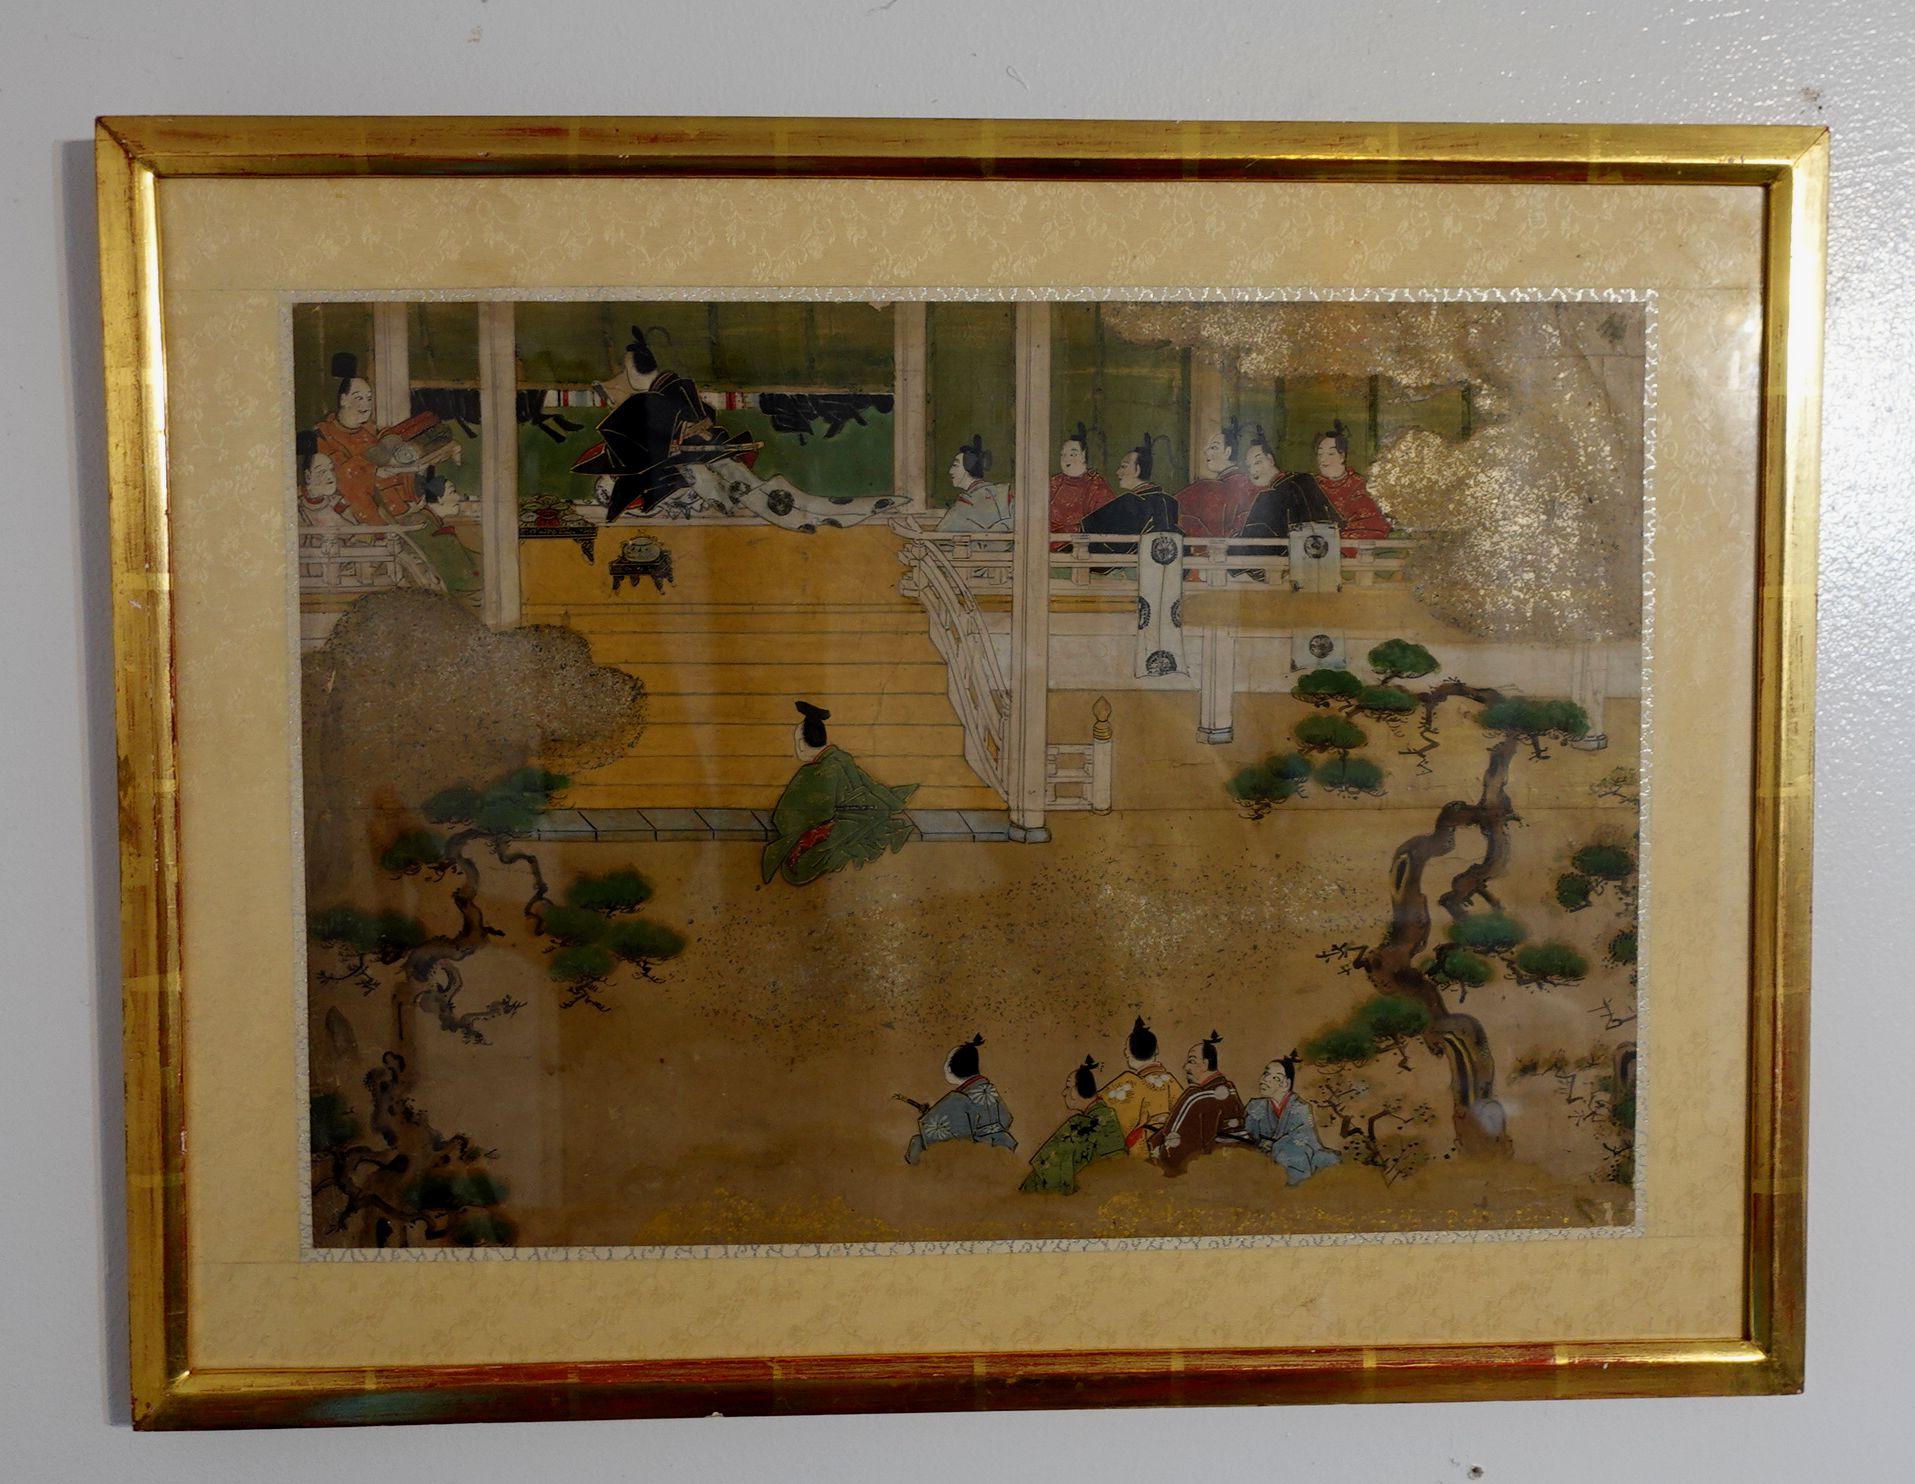 Anonymous (late 18th - 19th century)
Painting Depicting a Scene from the Tale of Genji, Japan, late Edo/Meiji period, depicting a garden scene with a clan leader in appreciation of a hanging scroll painting with his inferiors and servants in